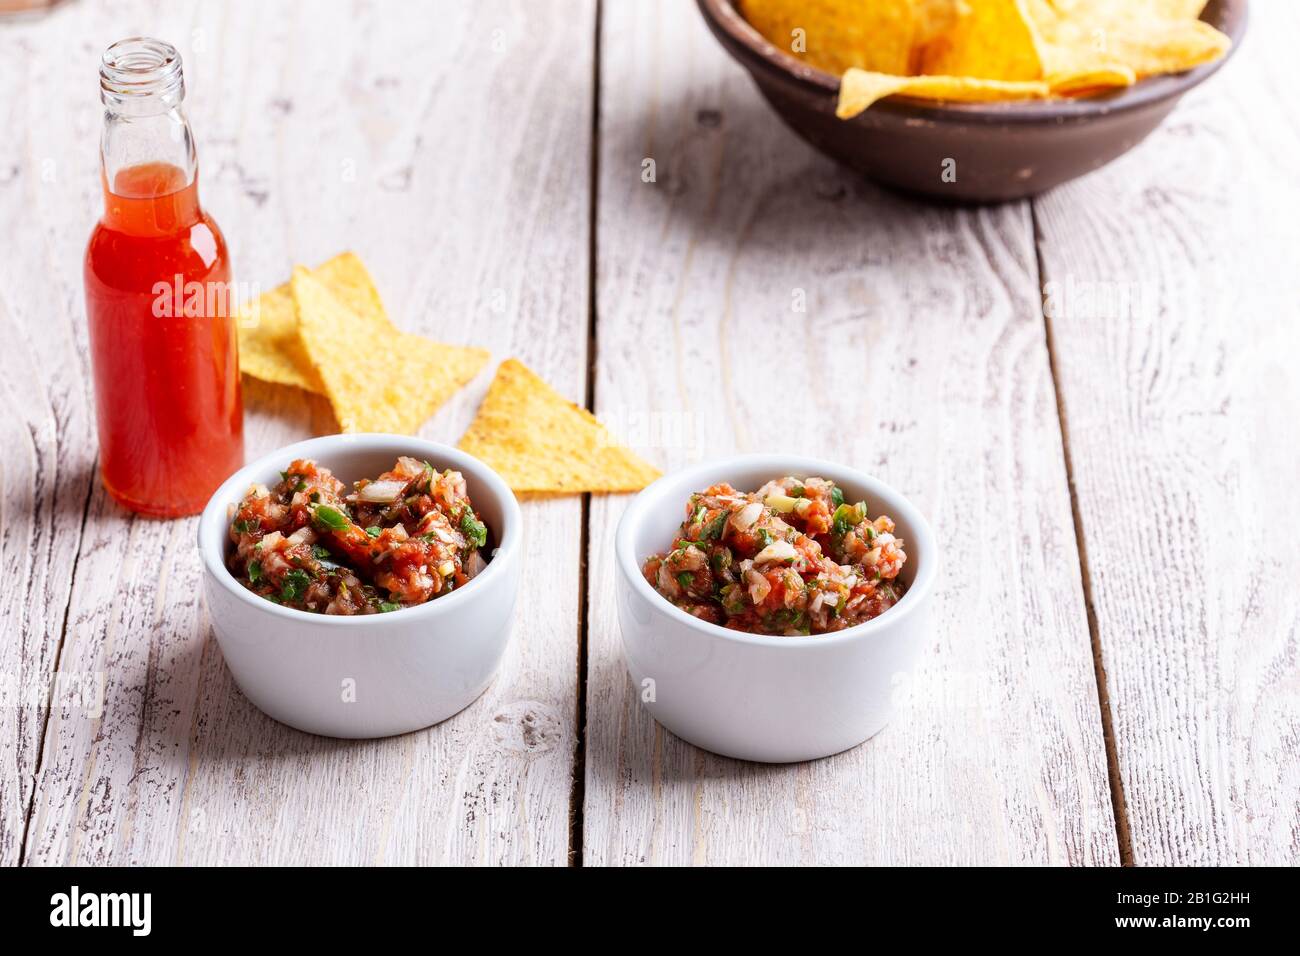 Two bowls full of salsa dip, hot red chili sauce bottle and tortilla chips on rustic wooden table Stock Photo